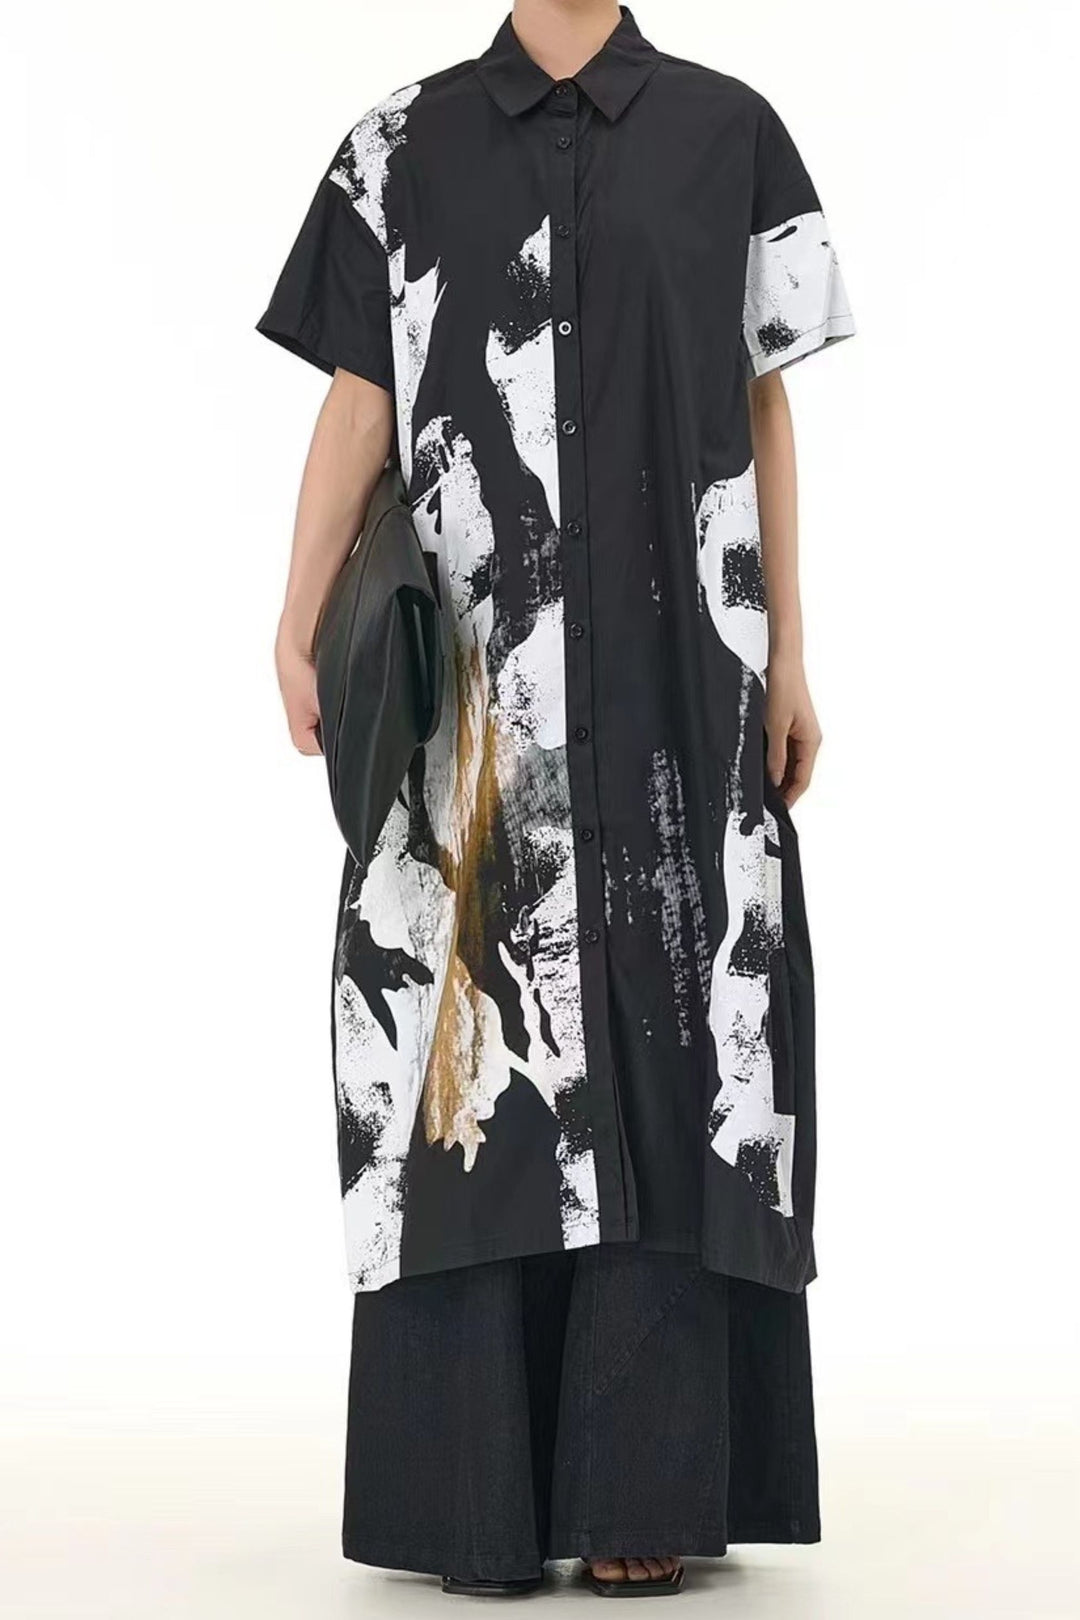 Oversized black shirt dress with abstract print